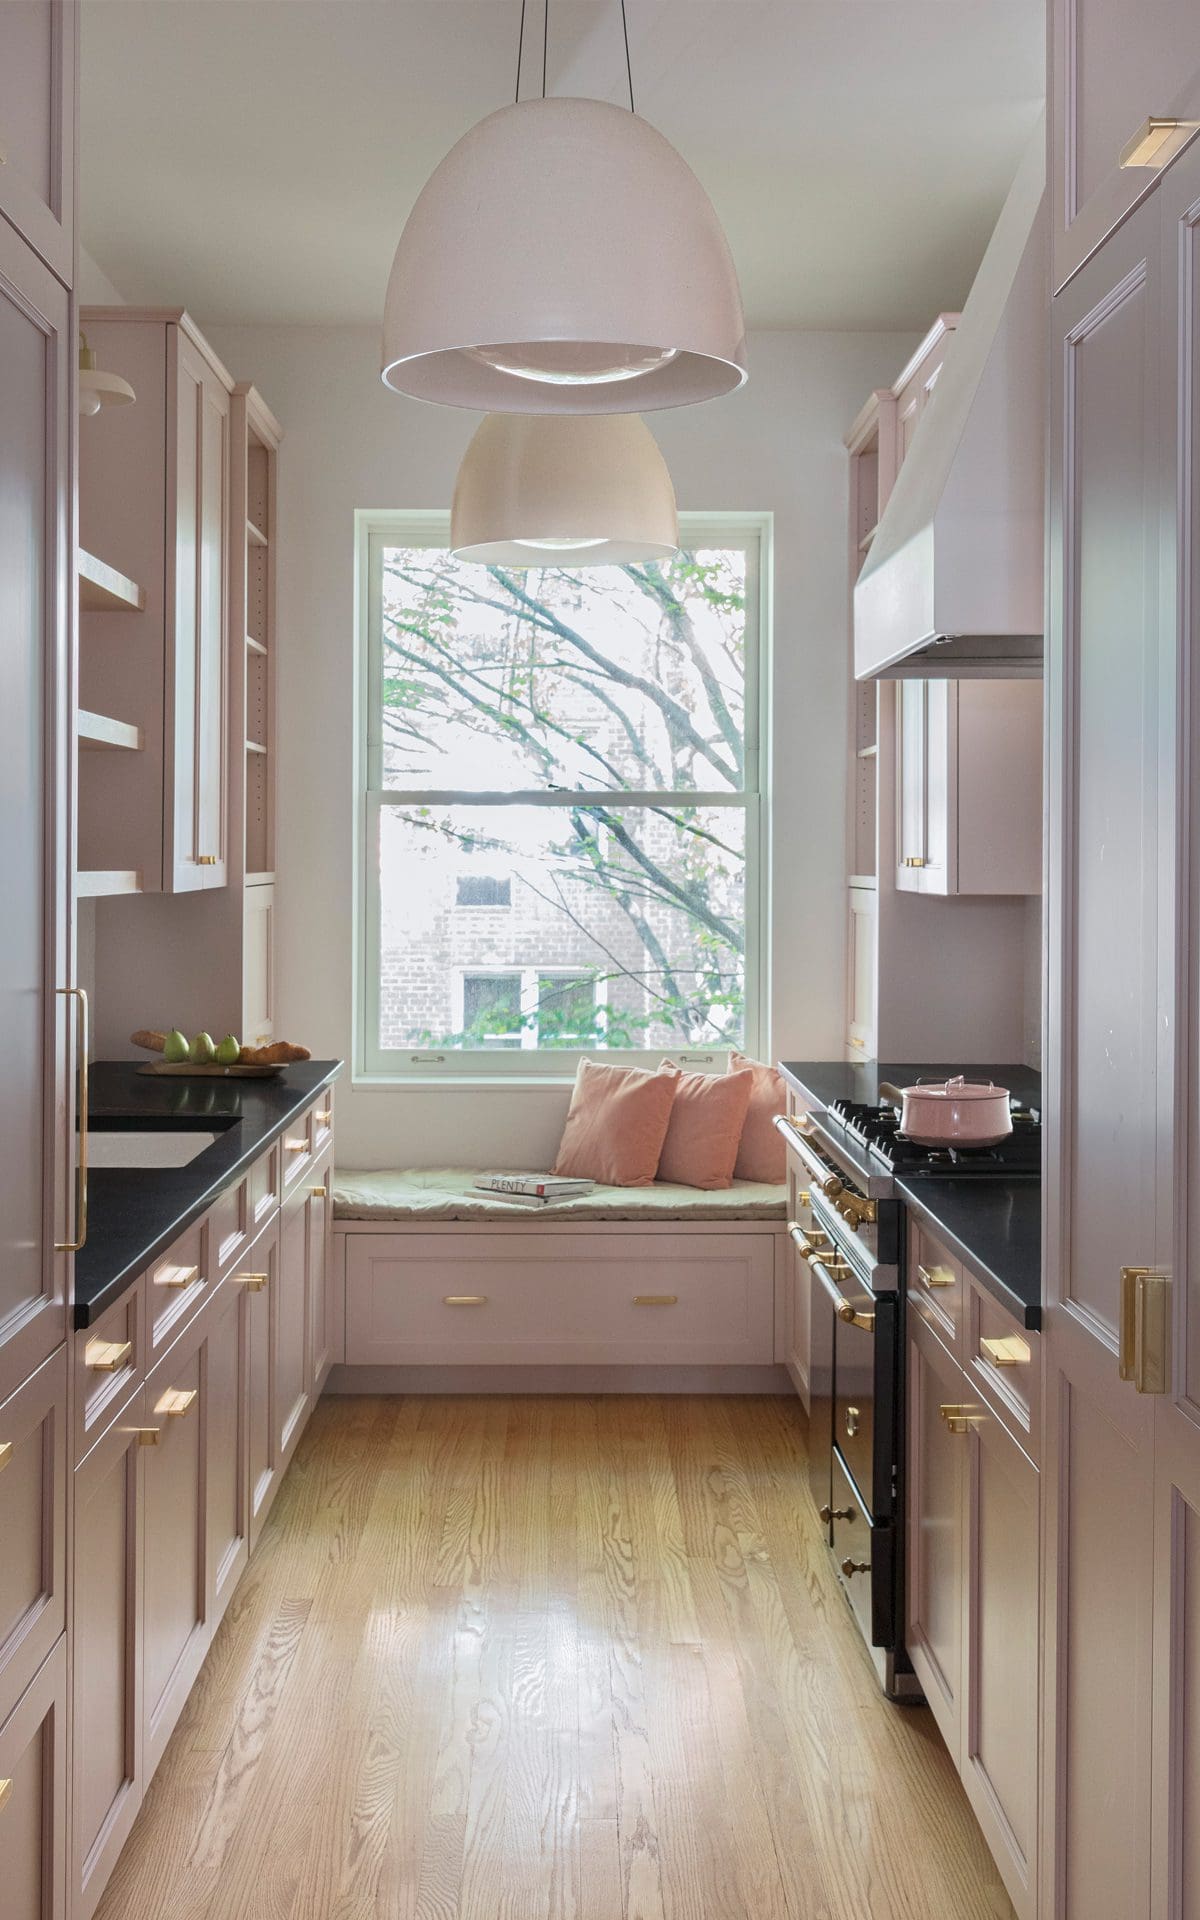 Classic kitchen features large window with window seat, pink cabinetry and dark countertops.